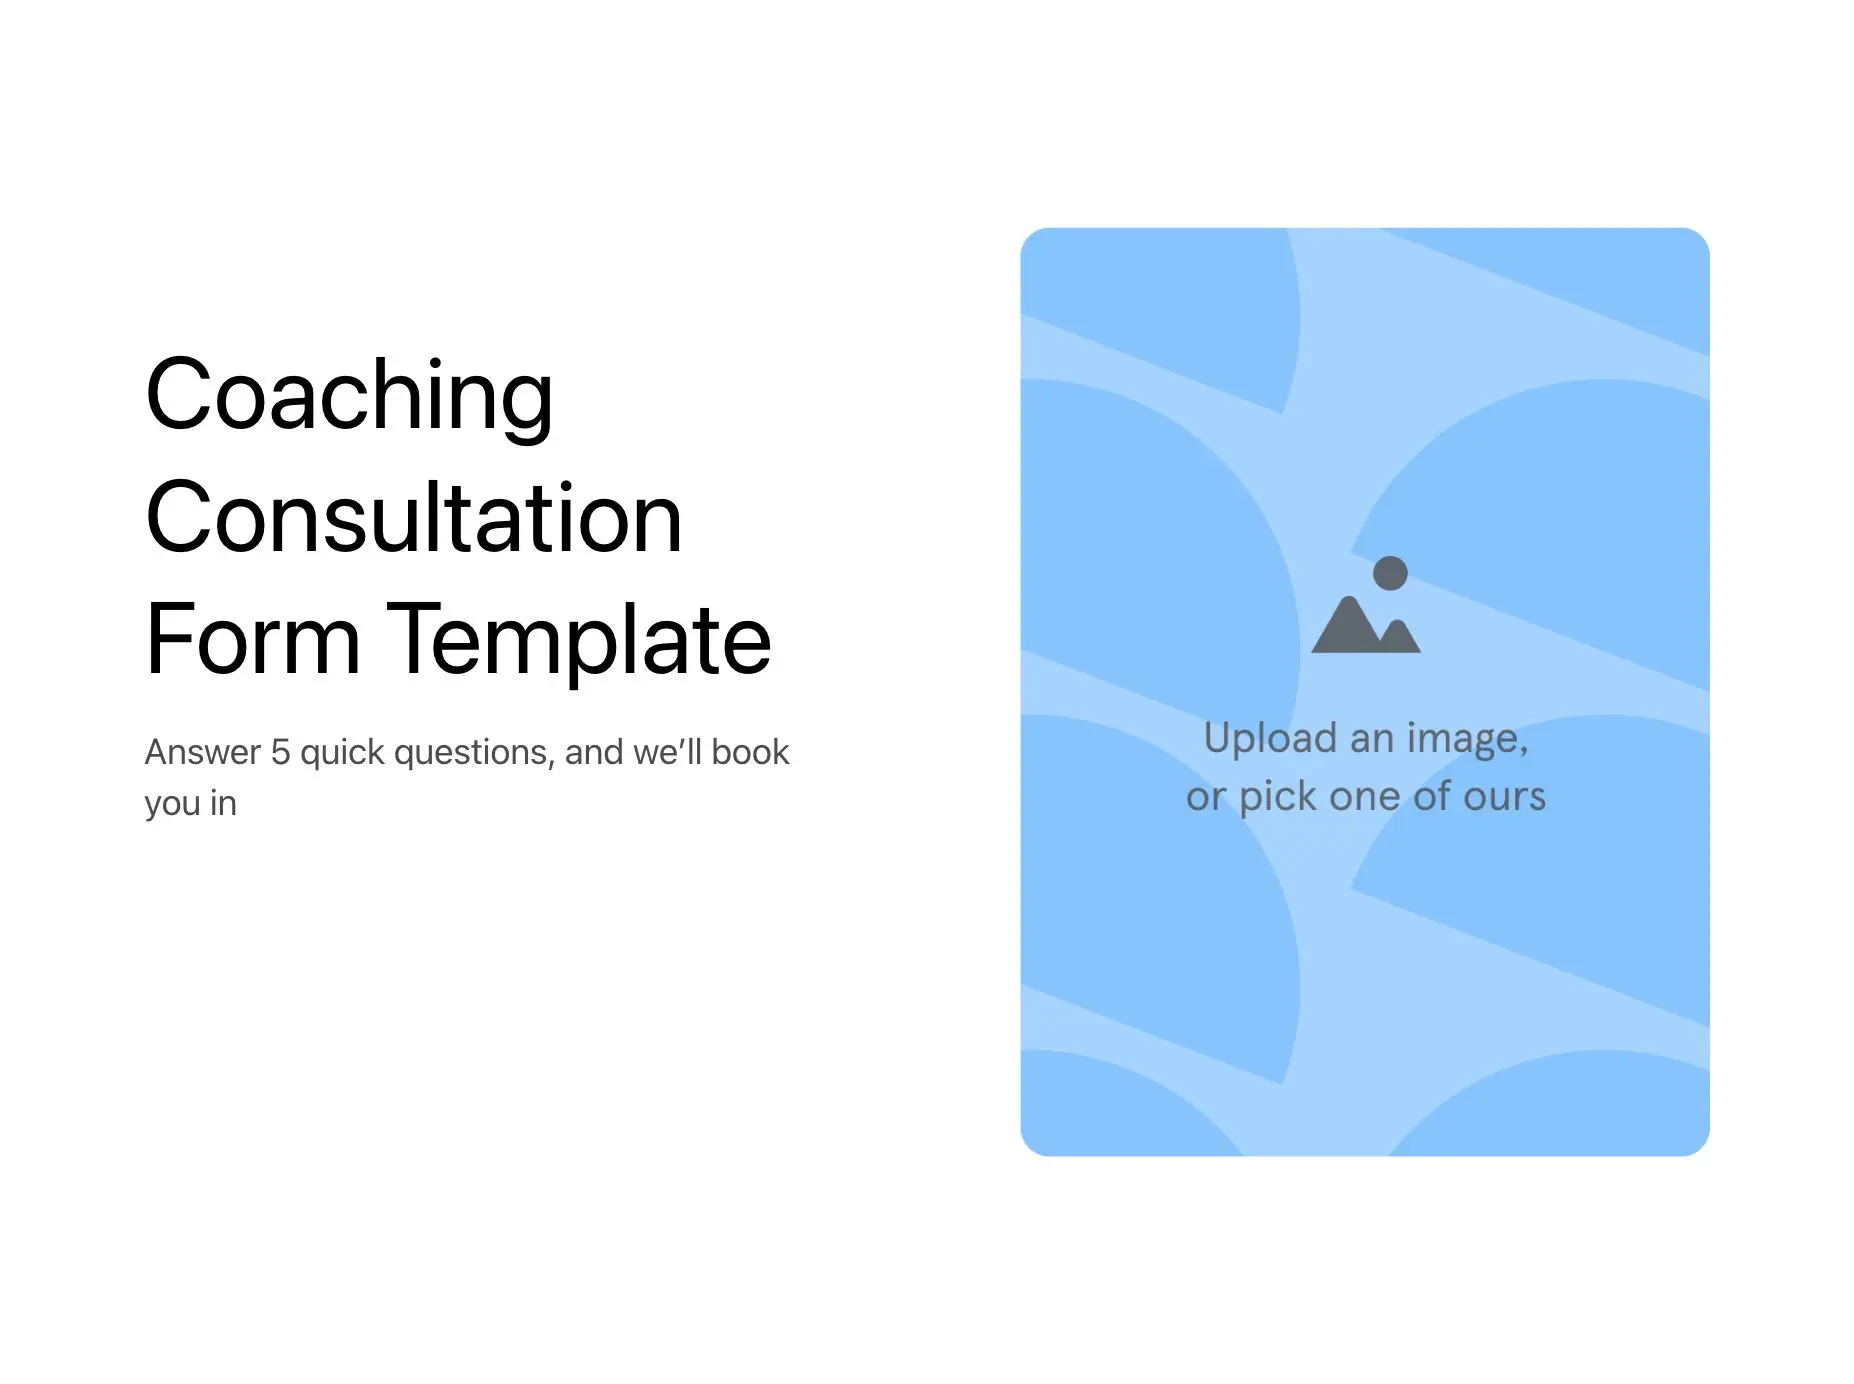 Coaching Consultation Form Template Hero